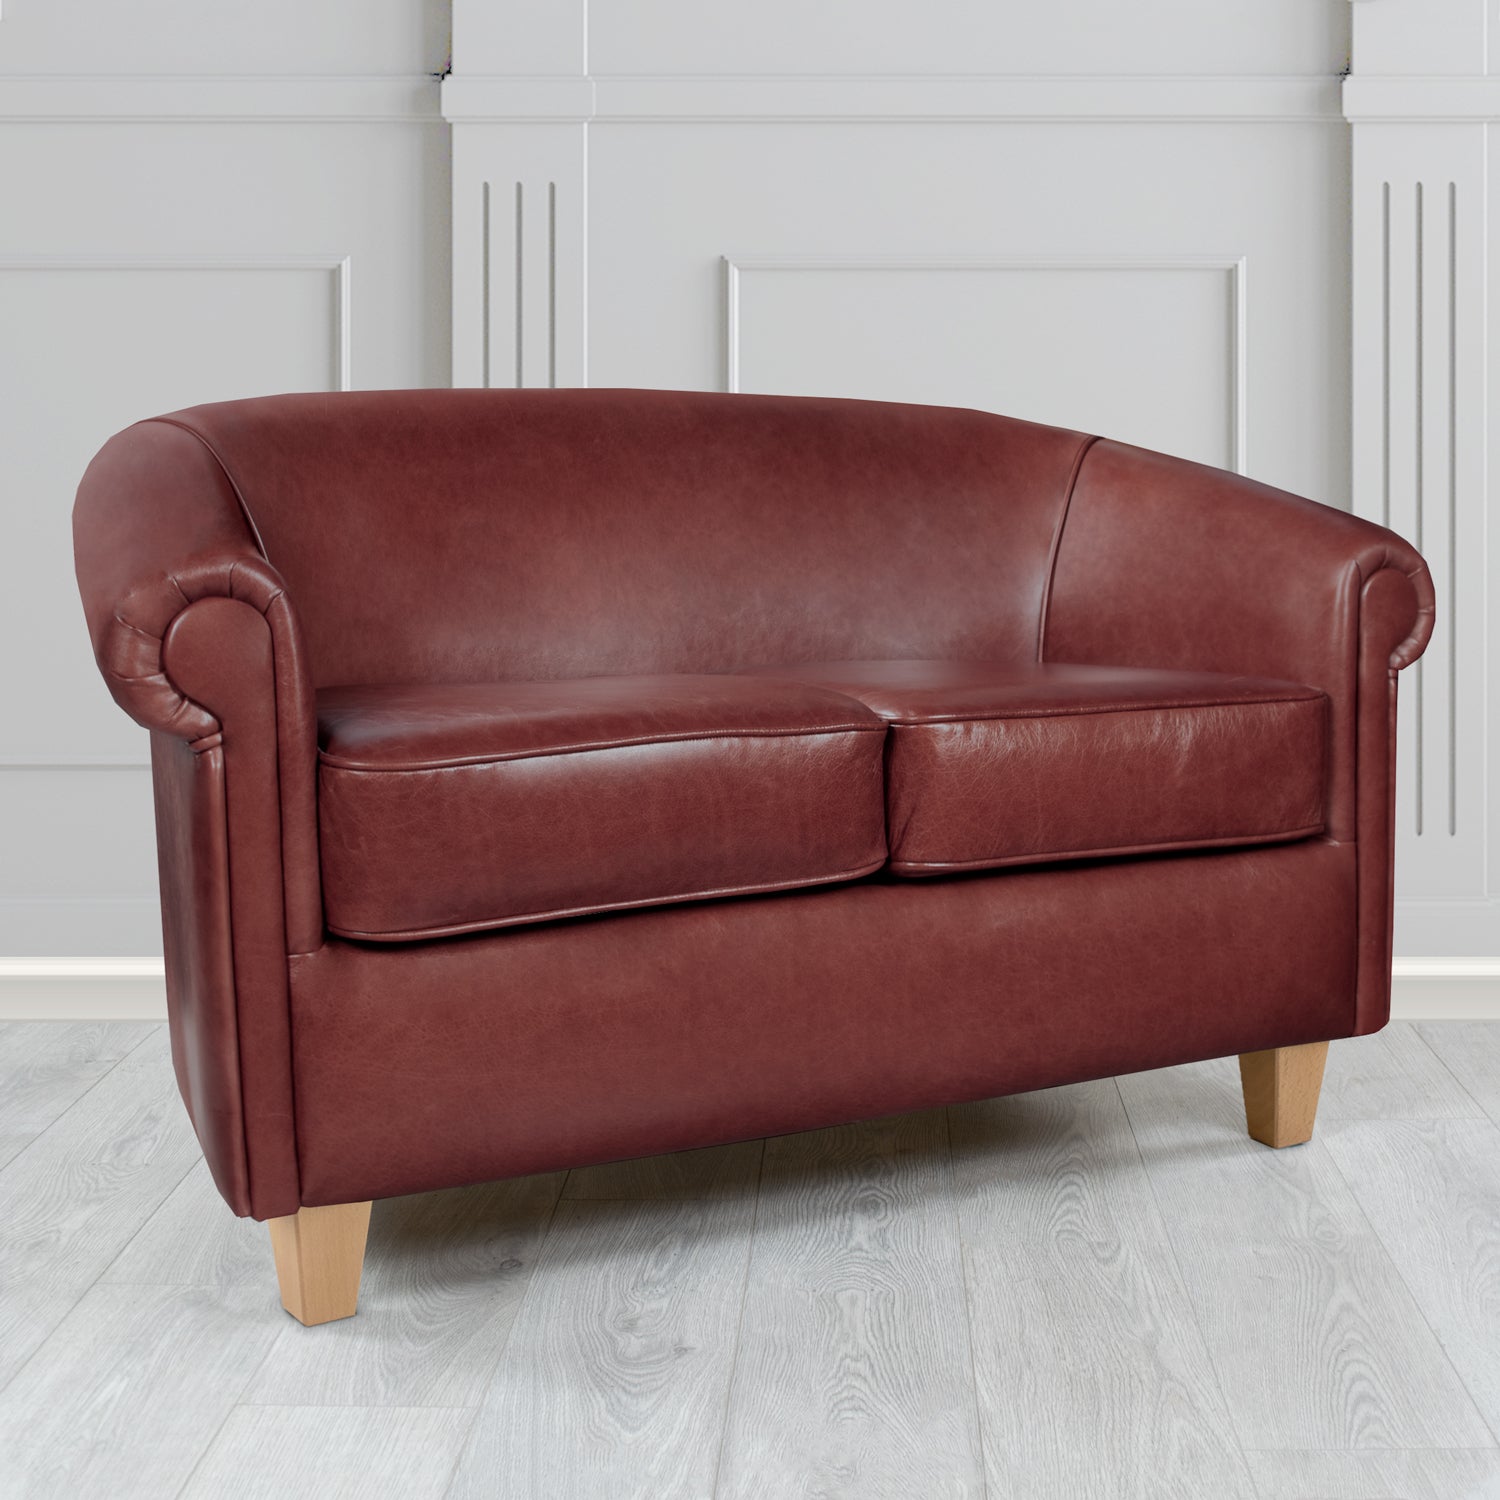 Siena 2 Seater Tub Sofa in Crib 5 Old English Red Brown Genuine Leather - The Tub Chair Shop